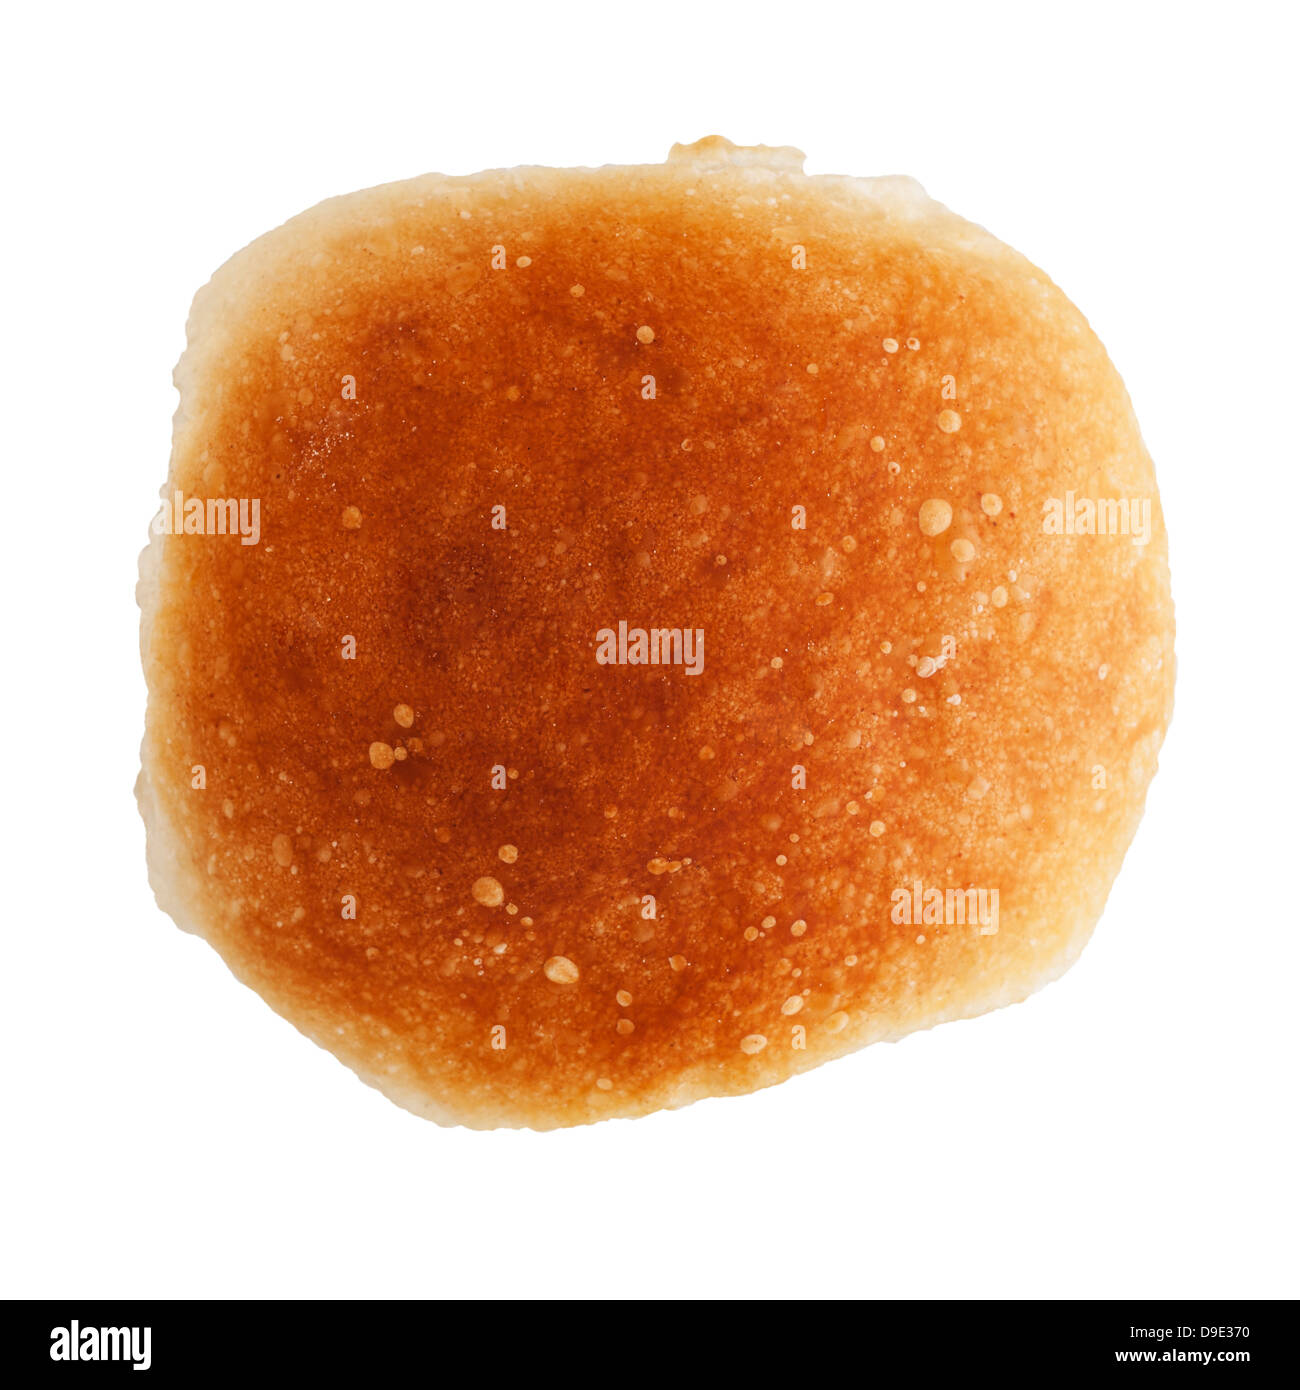 A home made white bread roll on a white background Stock Photo